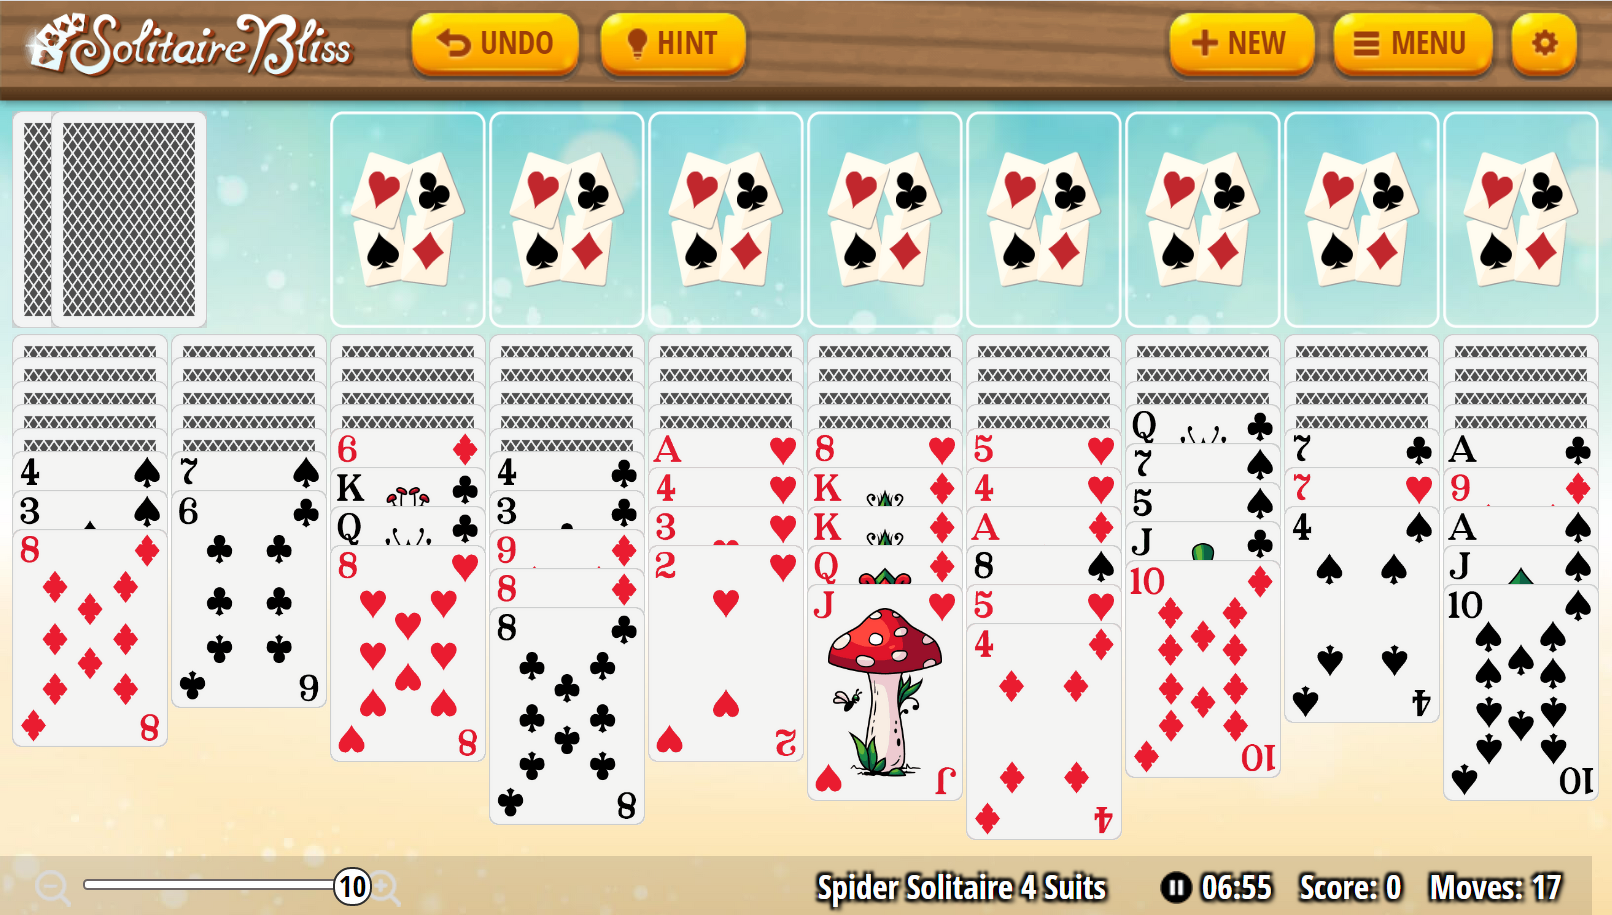 Spider Solitaire 1,2 and 4 suits 